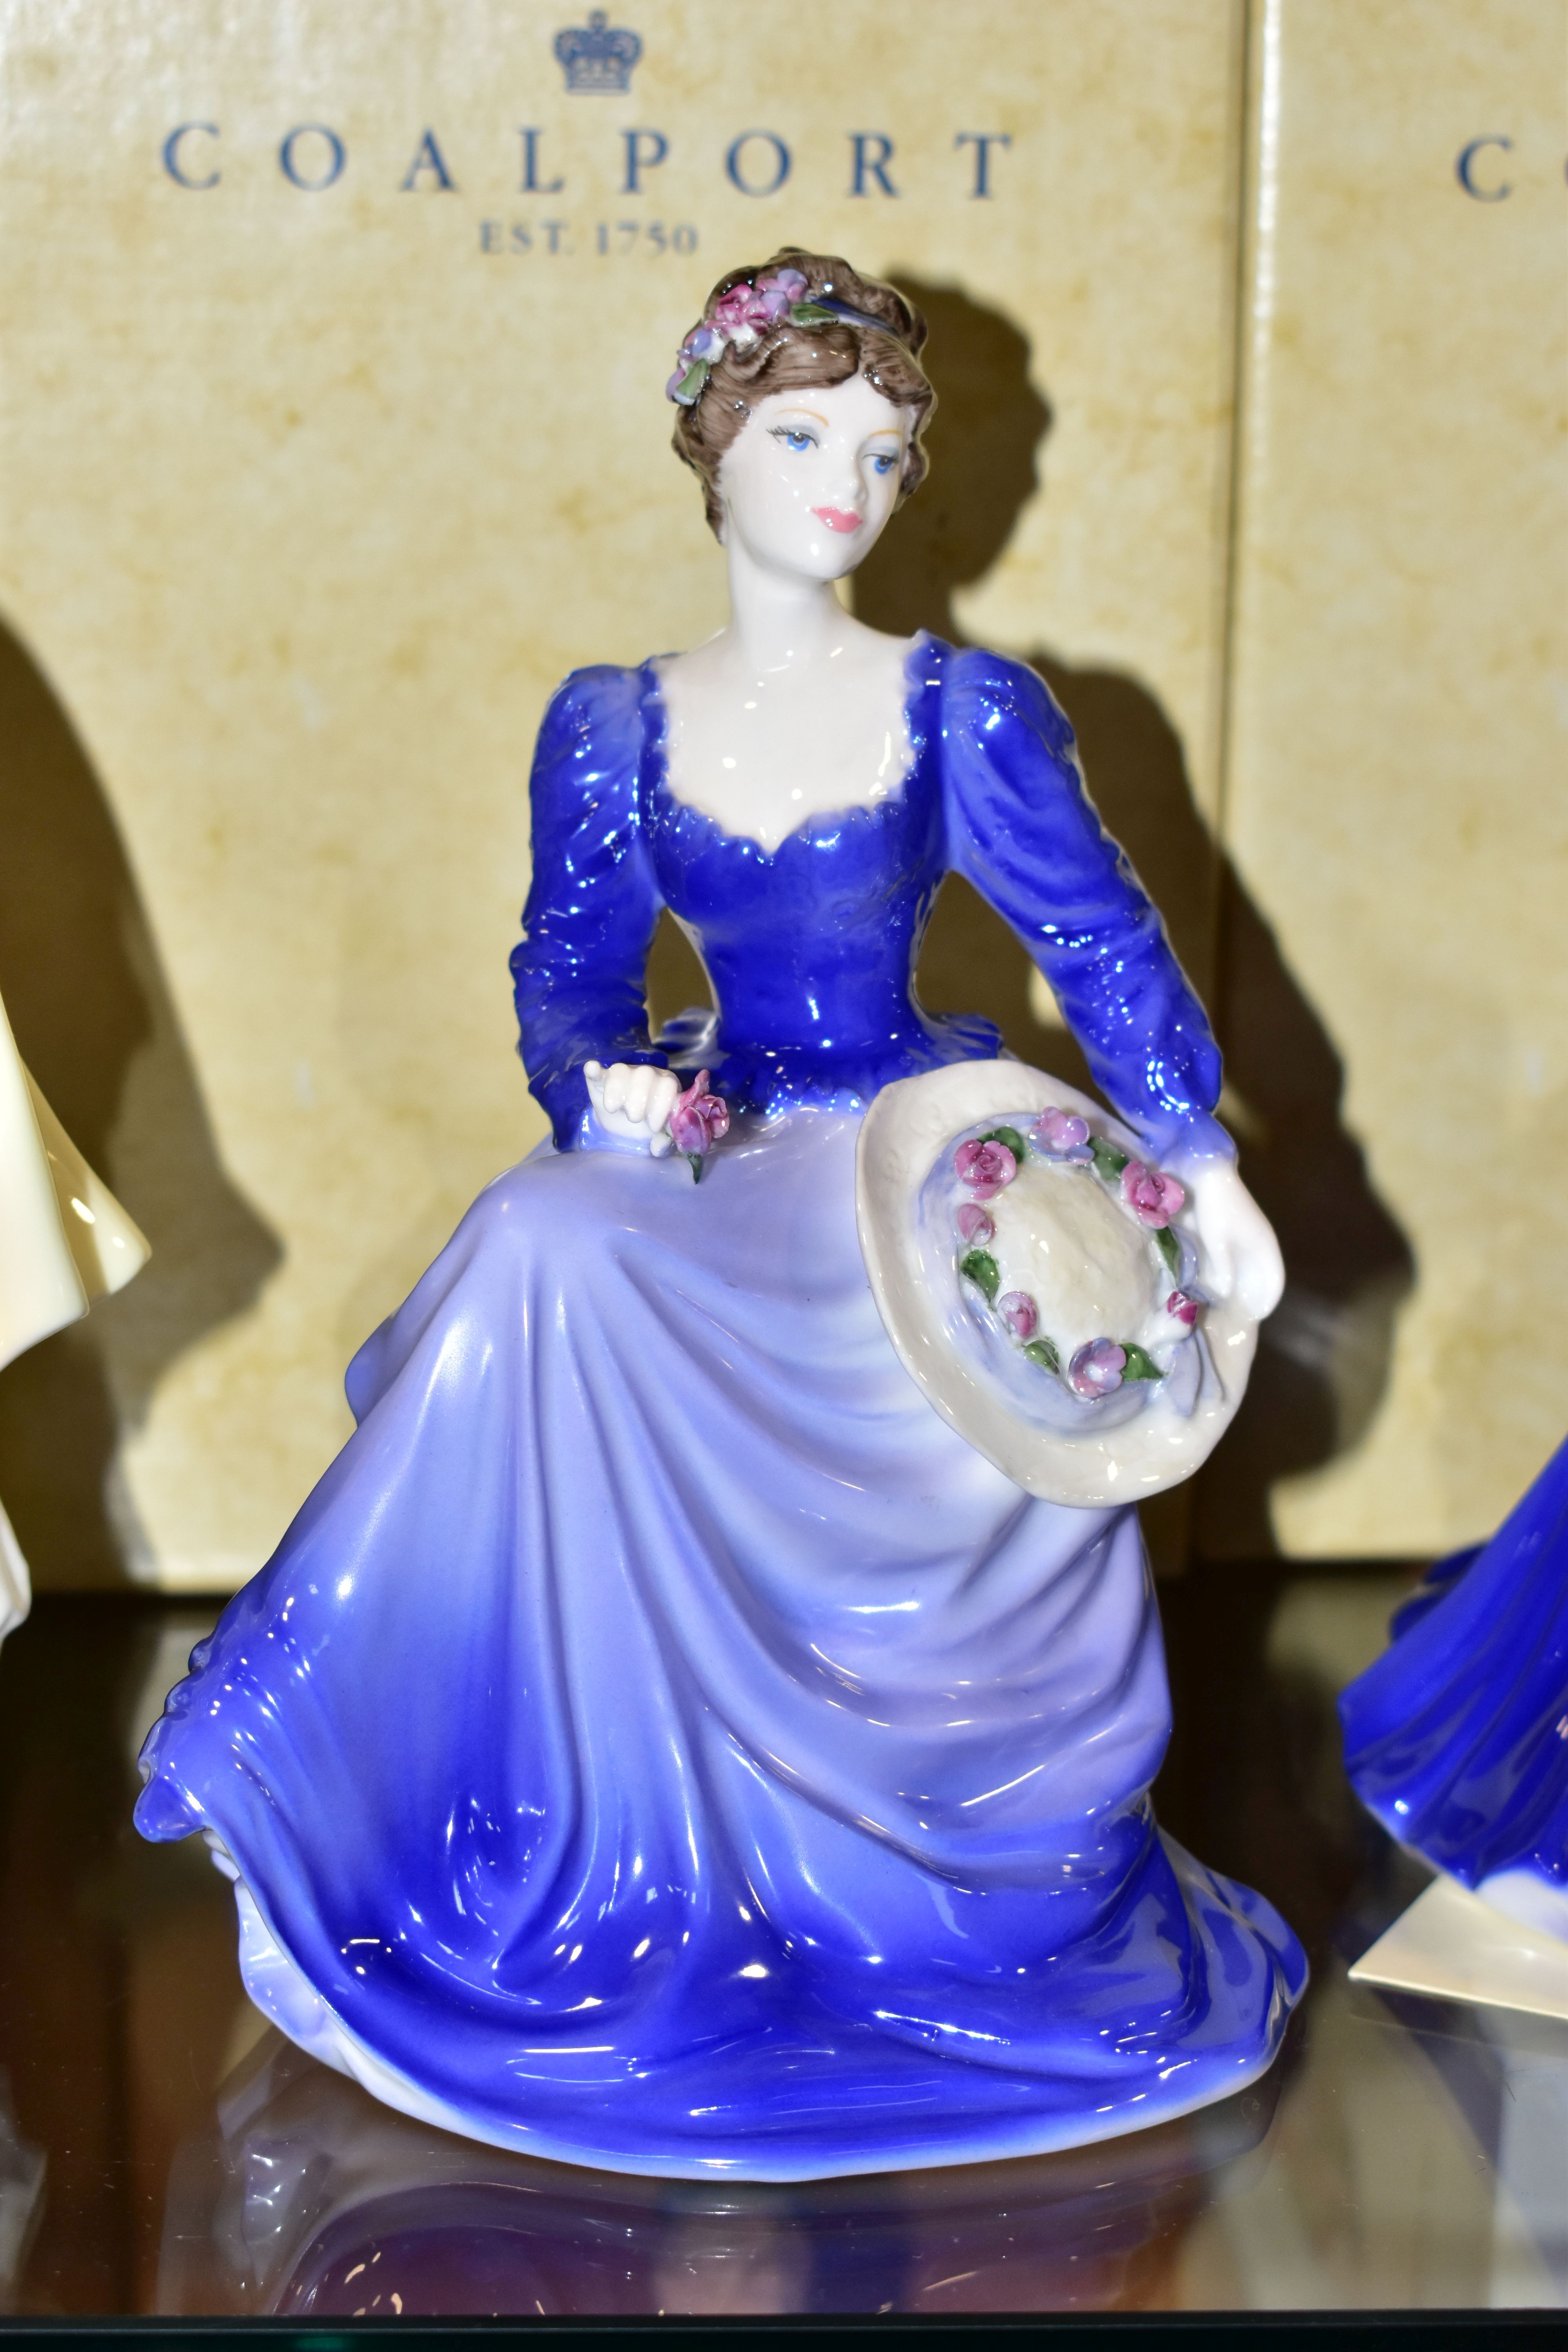 FIVE BOXED COALPORT LADIES OF FASHION FIGURINES, comprising Anne 1997 Lady of Fashion with - Image 6 of 7